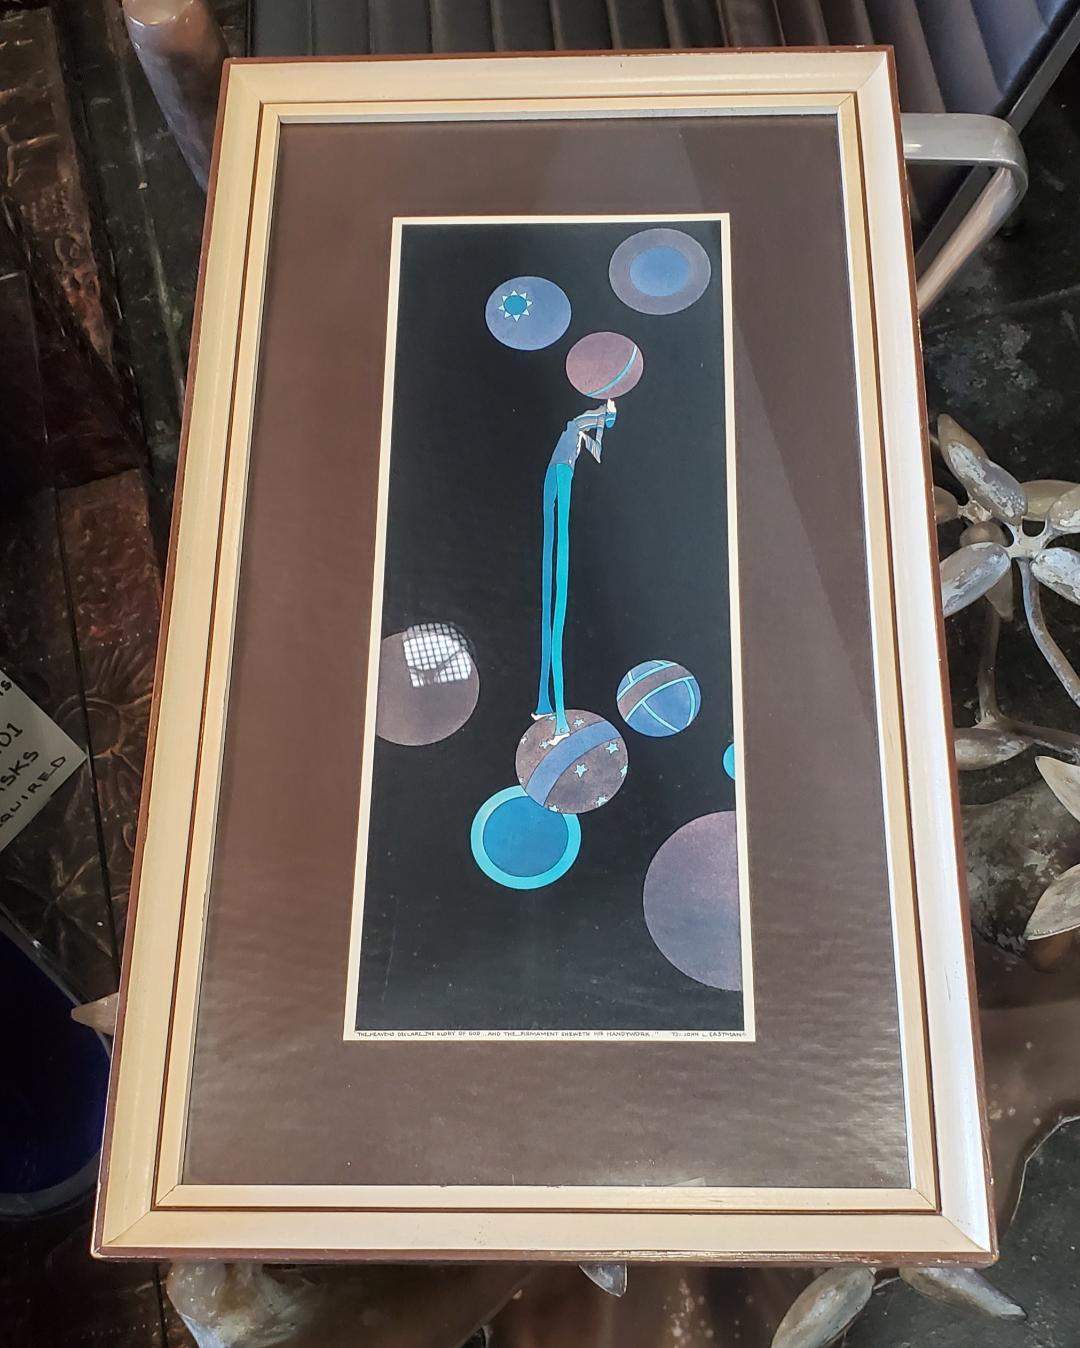 1970s Vintage John Luke Eastman Framed Serigraph Artwork Print Titled - The Heavens Declare The Glory Of God And The Firmament Sheweth His Handywork, 1973

This Framed Serigraph Is Titled And Dated. Original Wooden Frame. The Frame Shows Age And